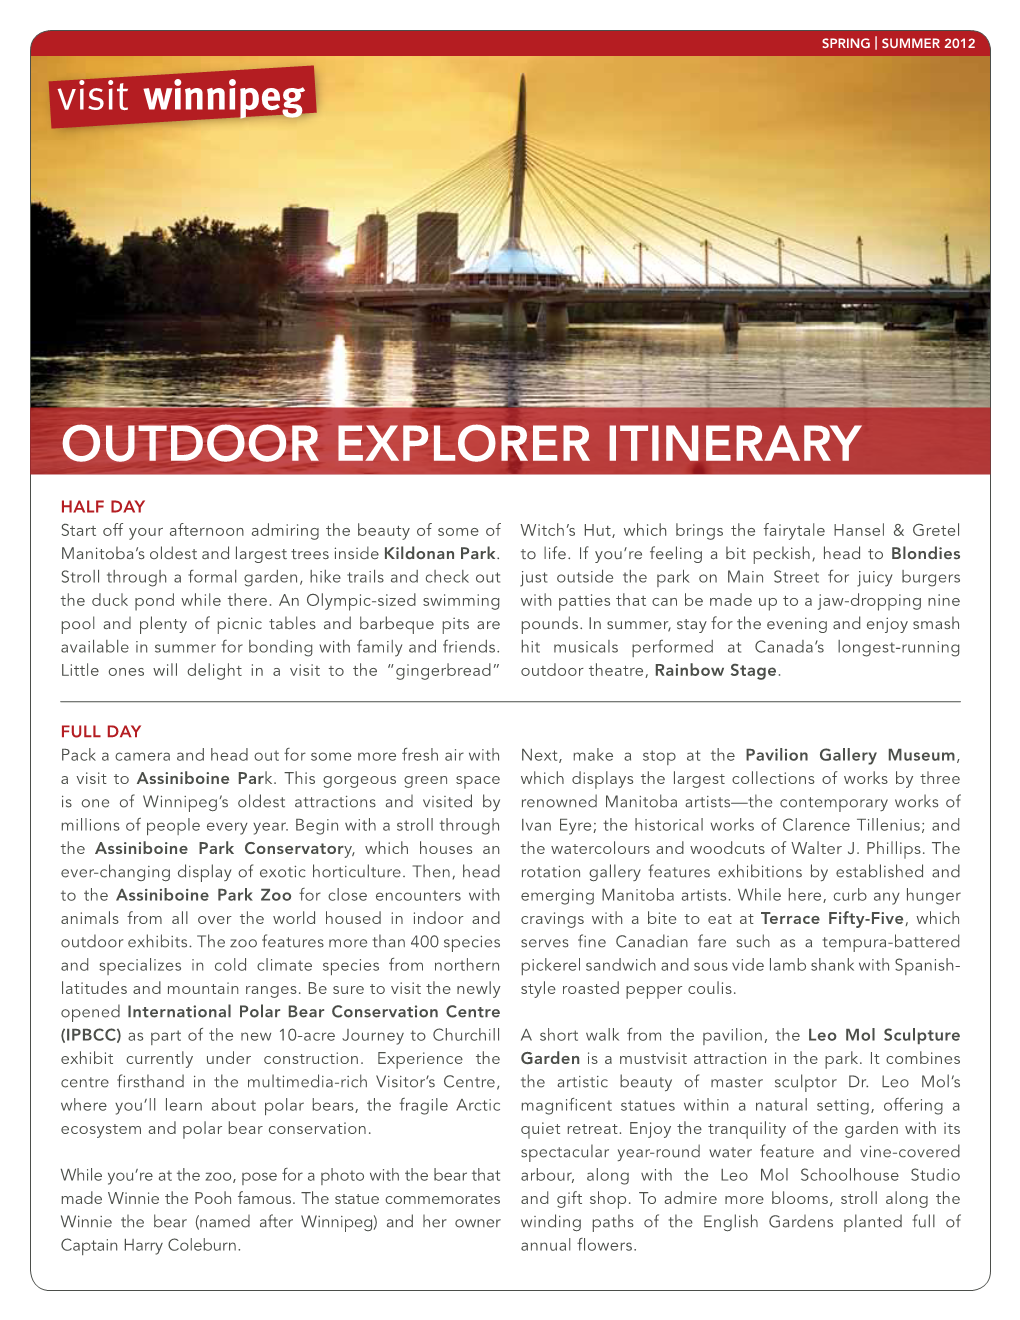 Outdoor Explorer Itinerary